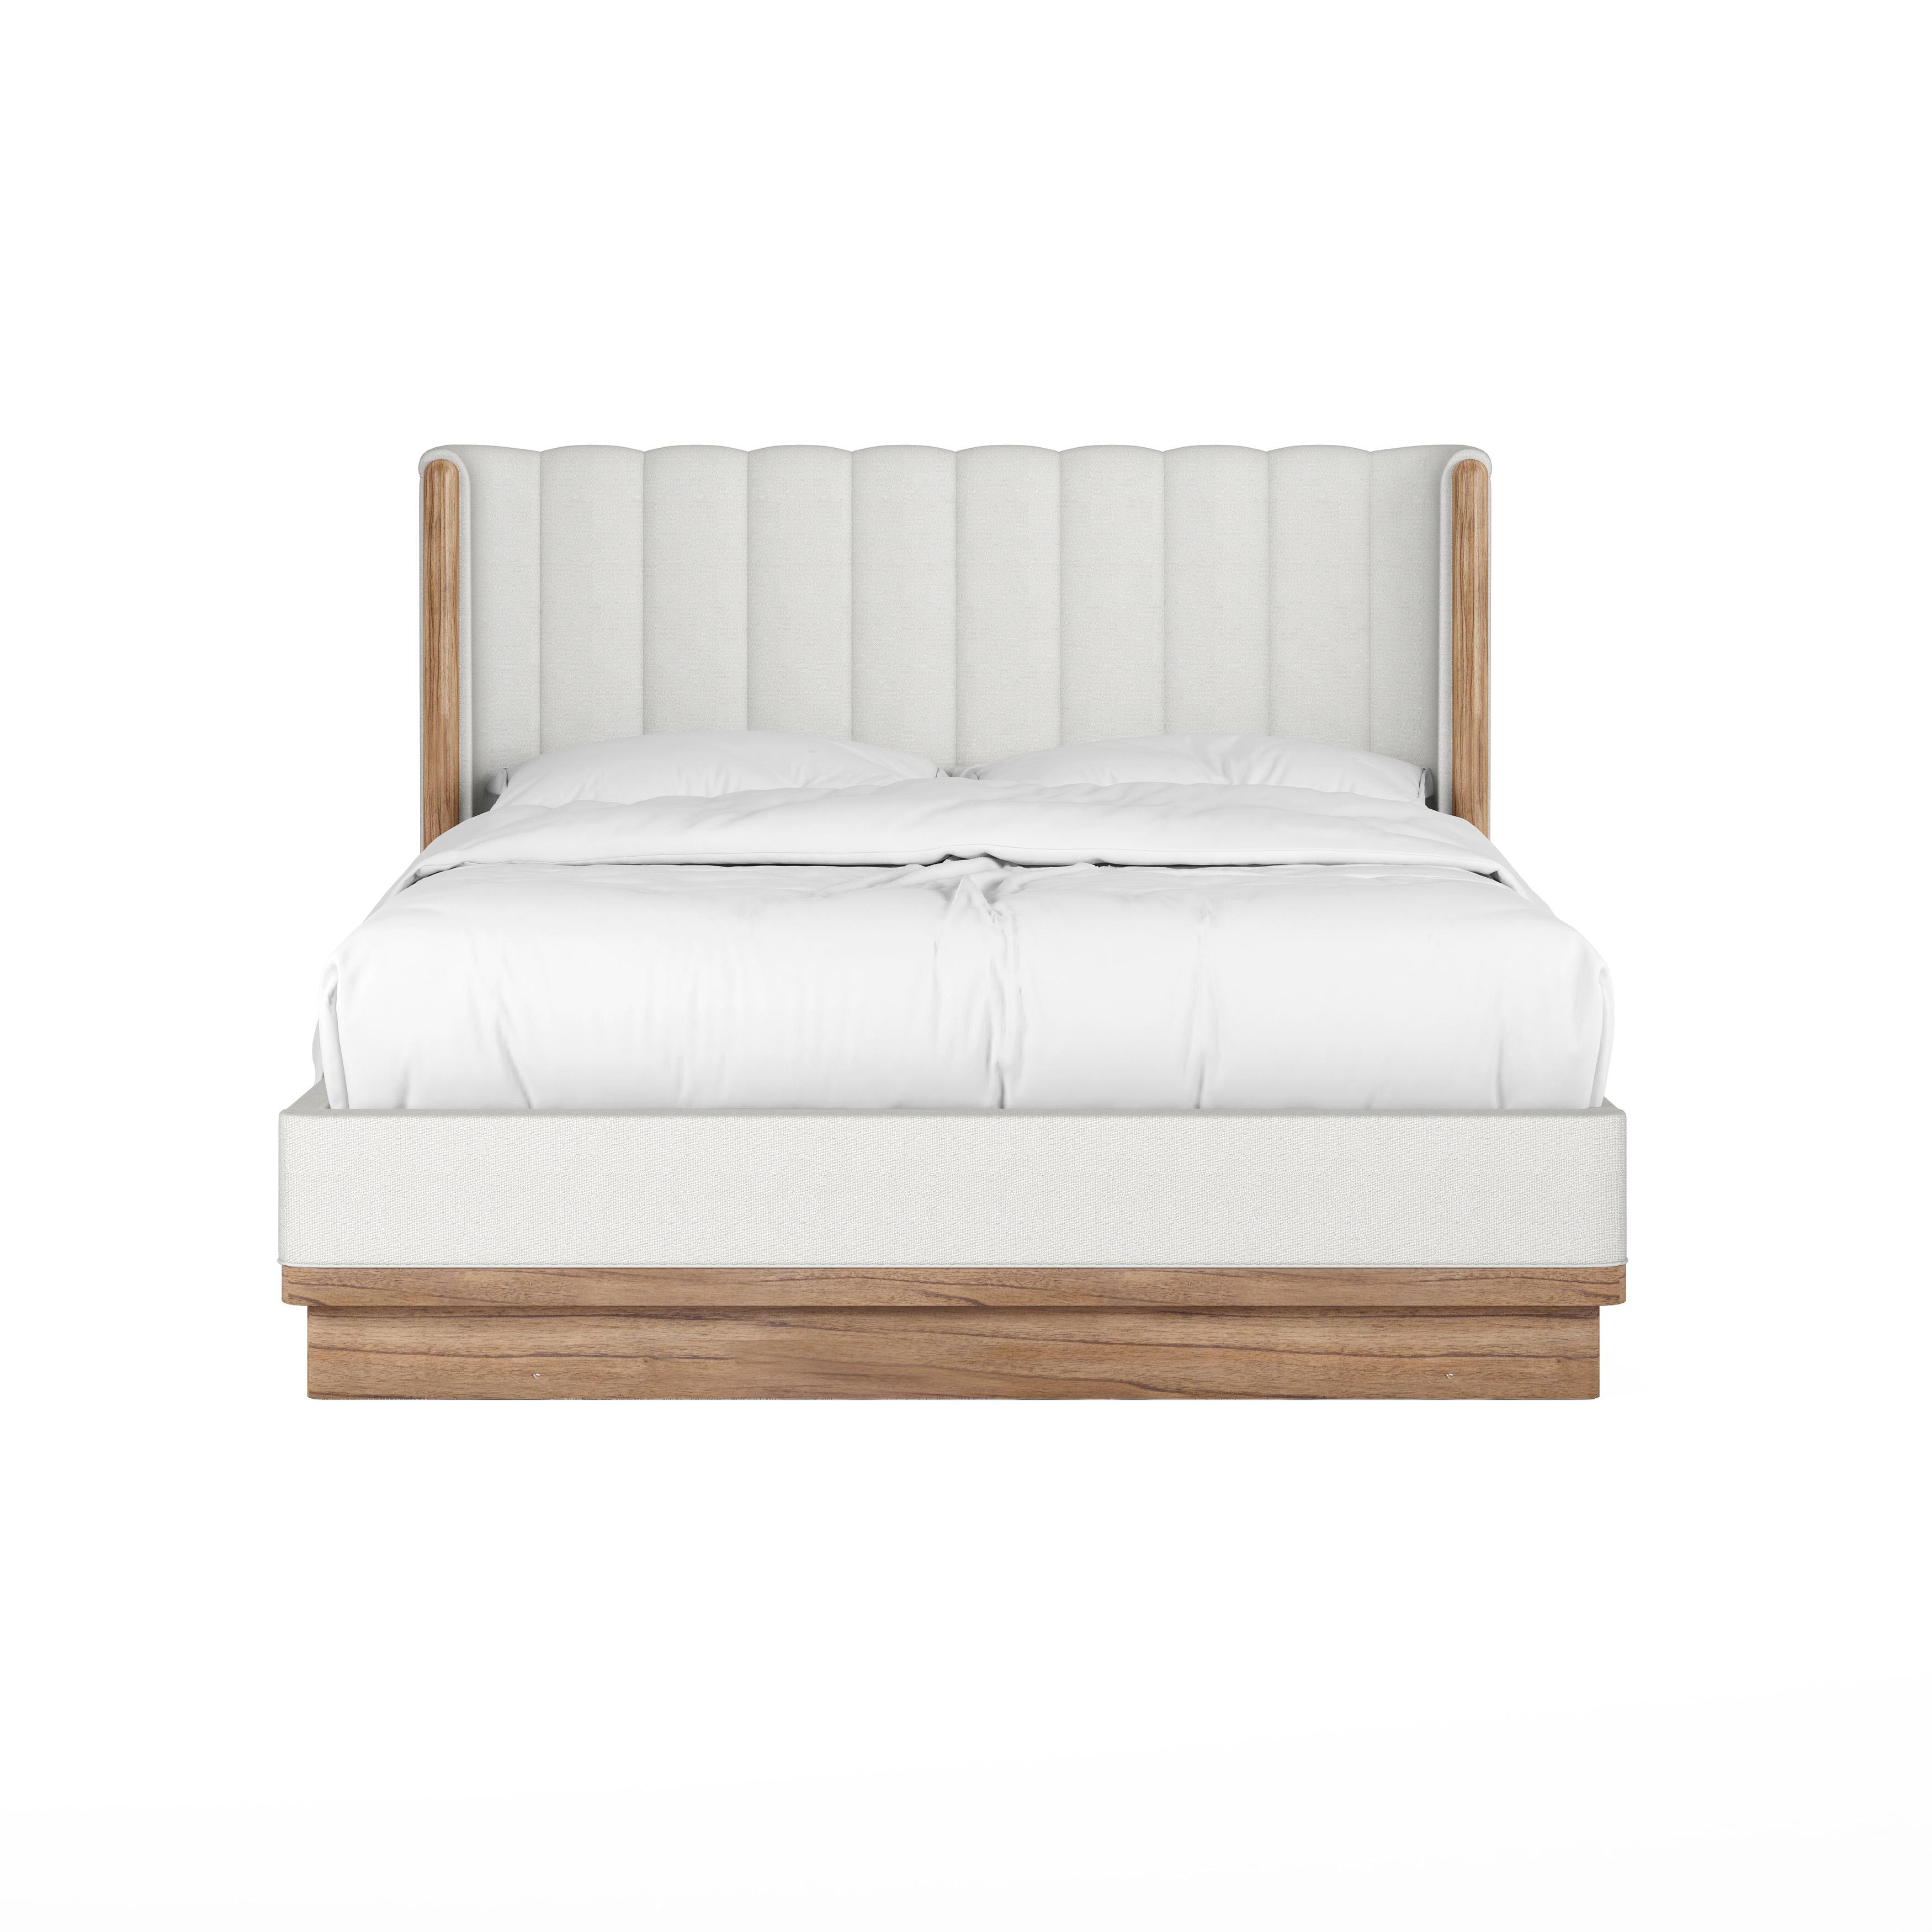 Traditional, Casual Panel Bed Portico 323135-3335 in White, Brown 